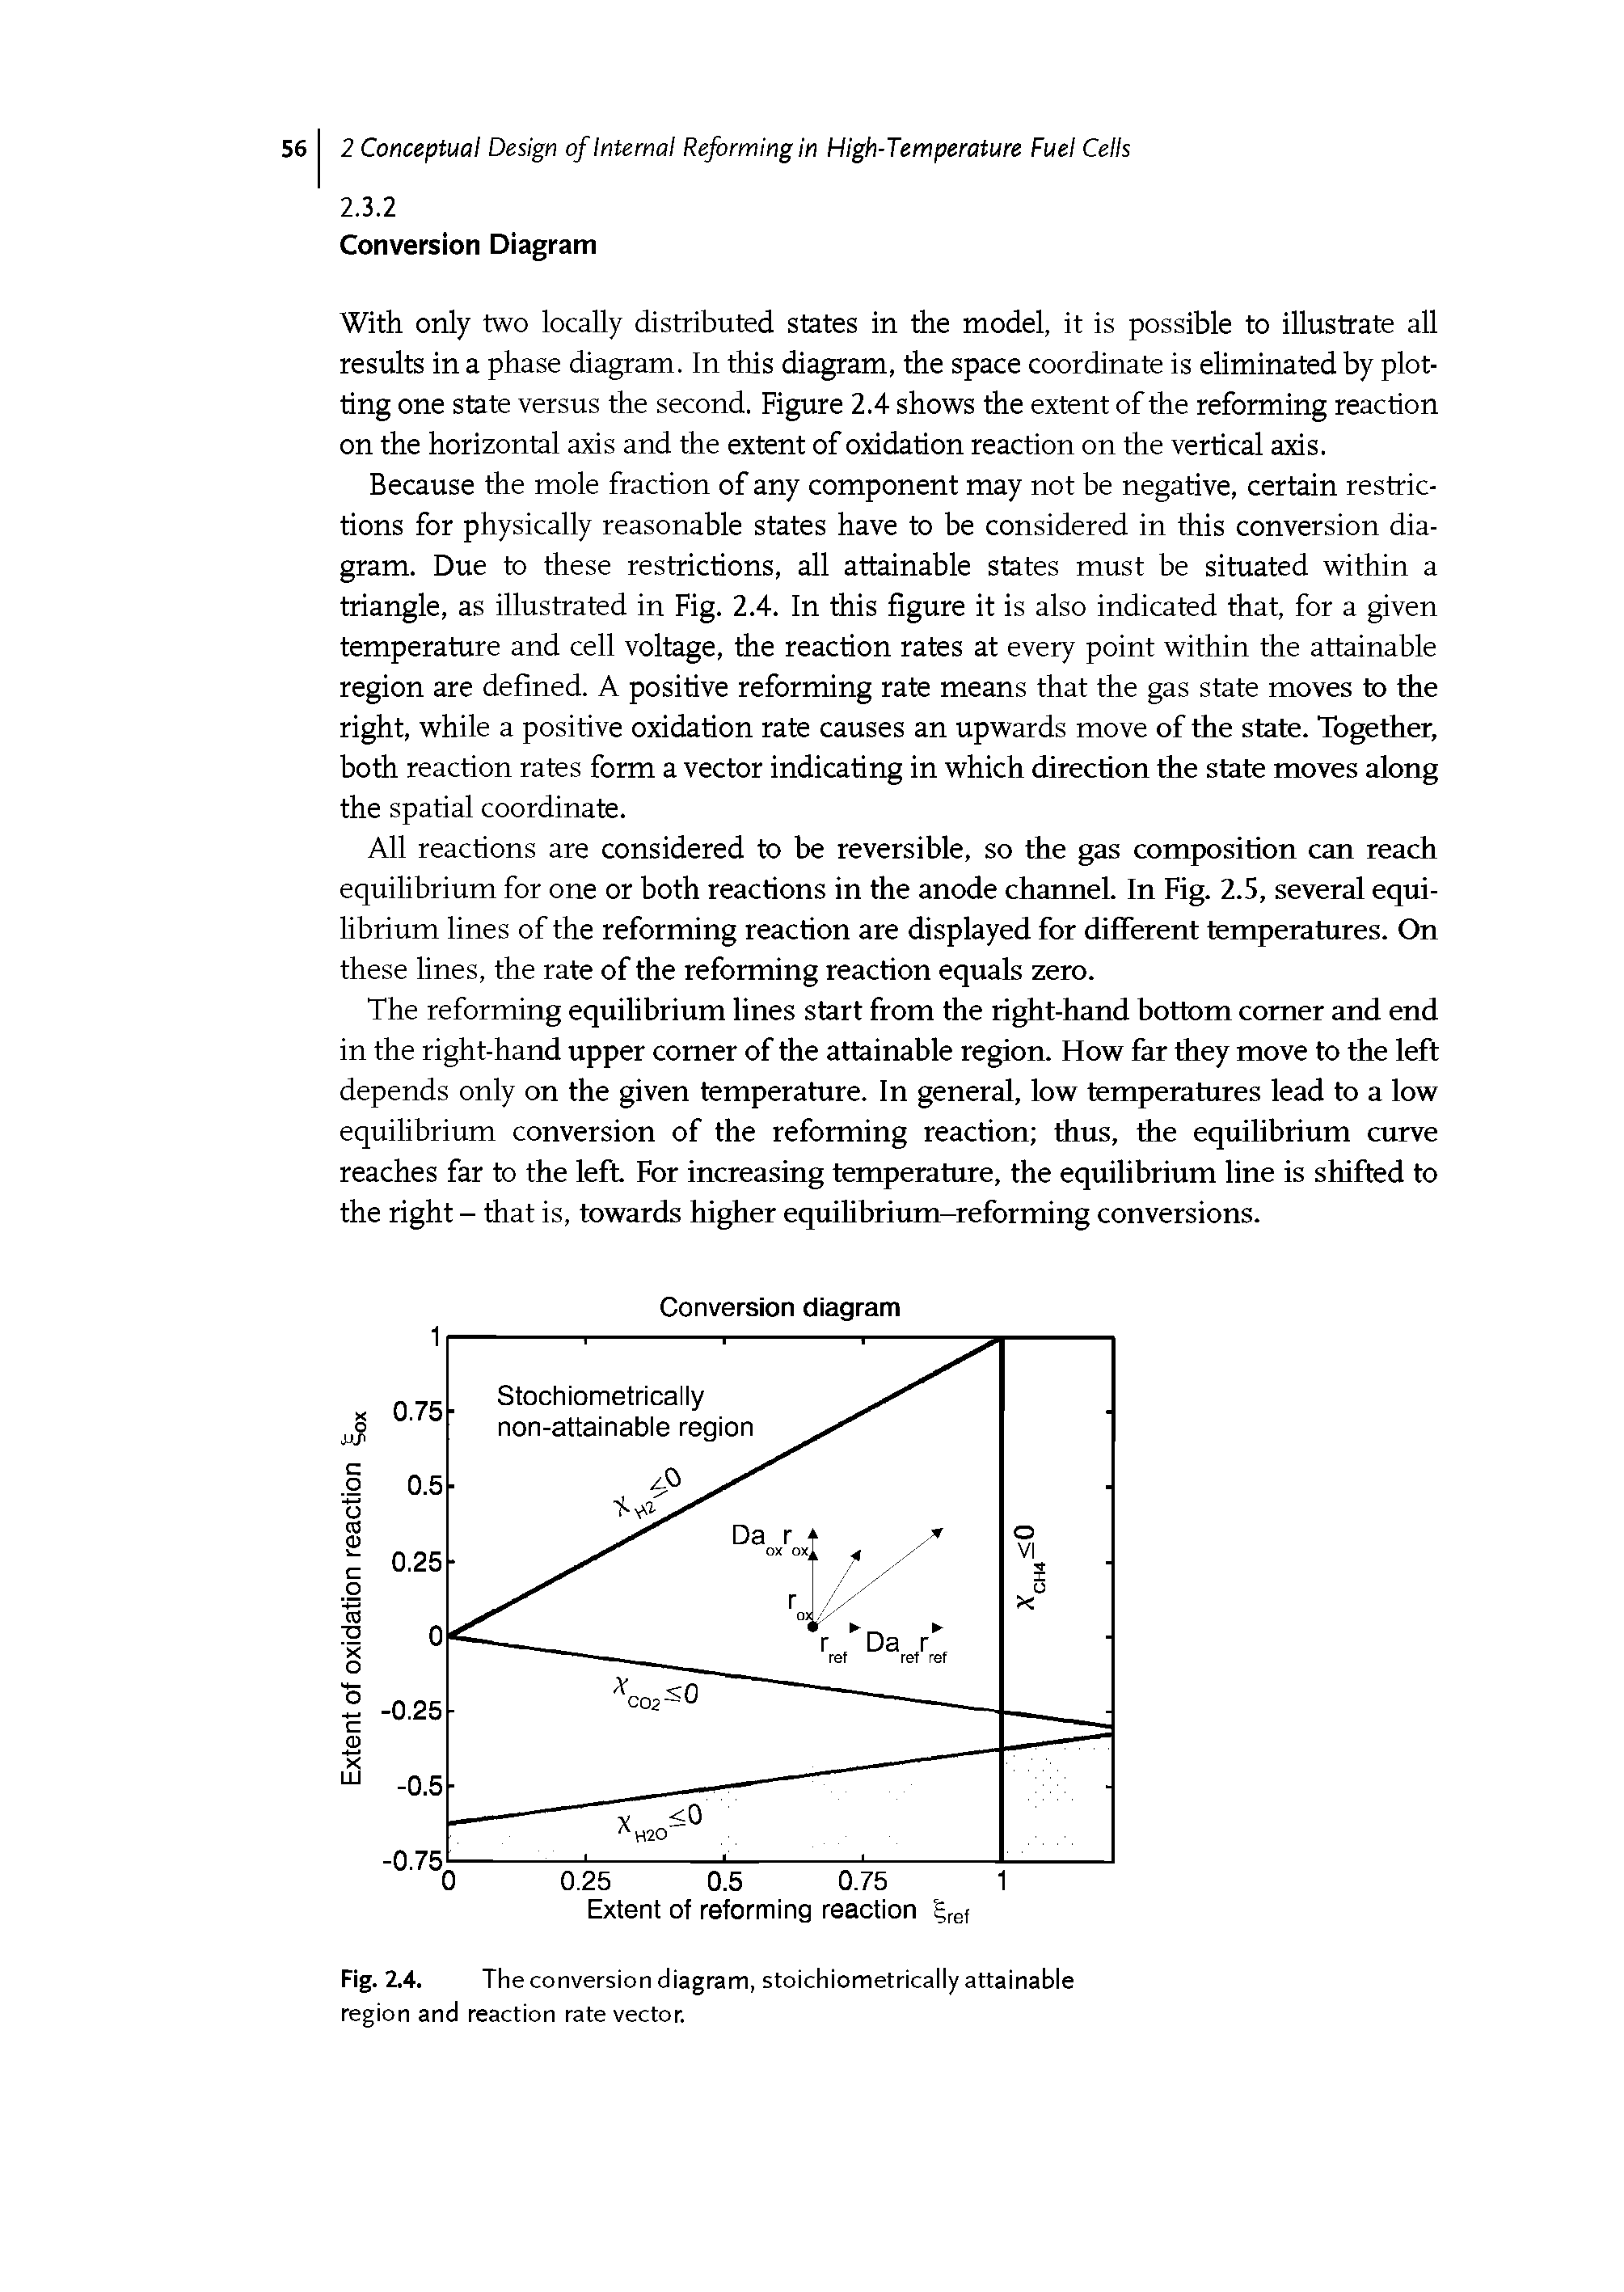 Fig. 2.4. The conversion diagram, stoichiometrically attainable region and reaction rate vector.